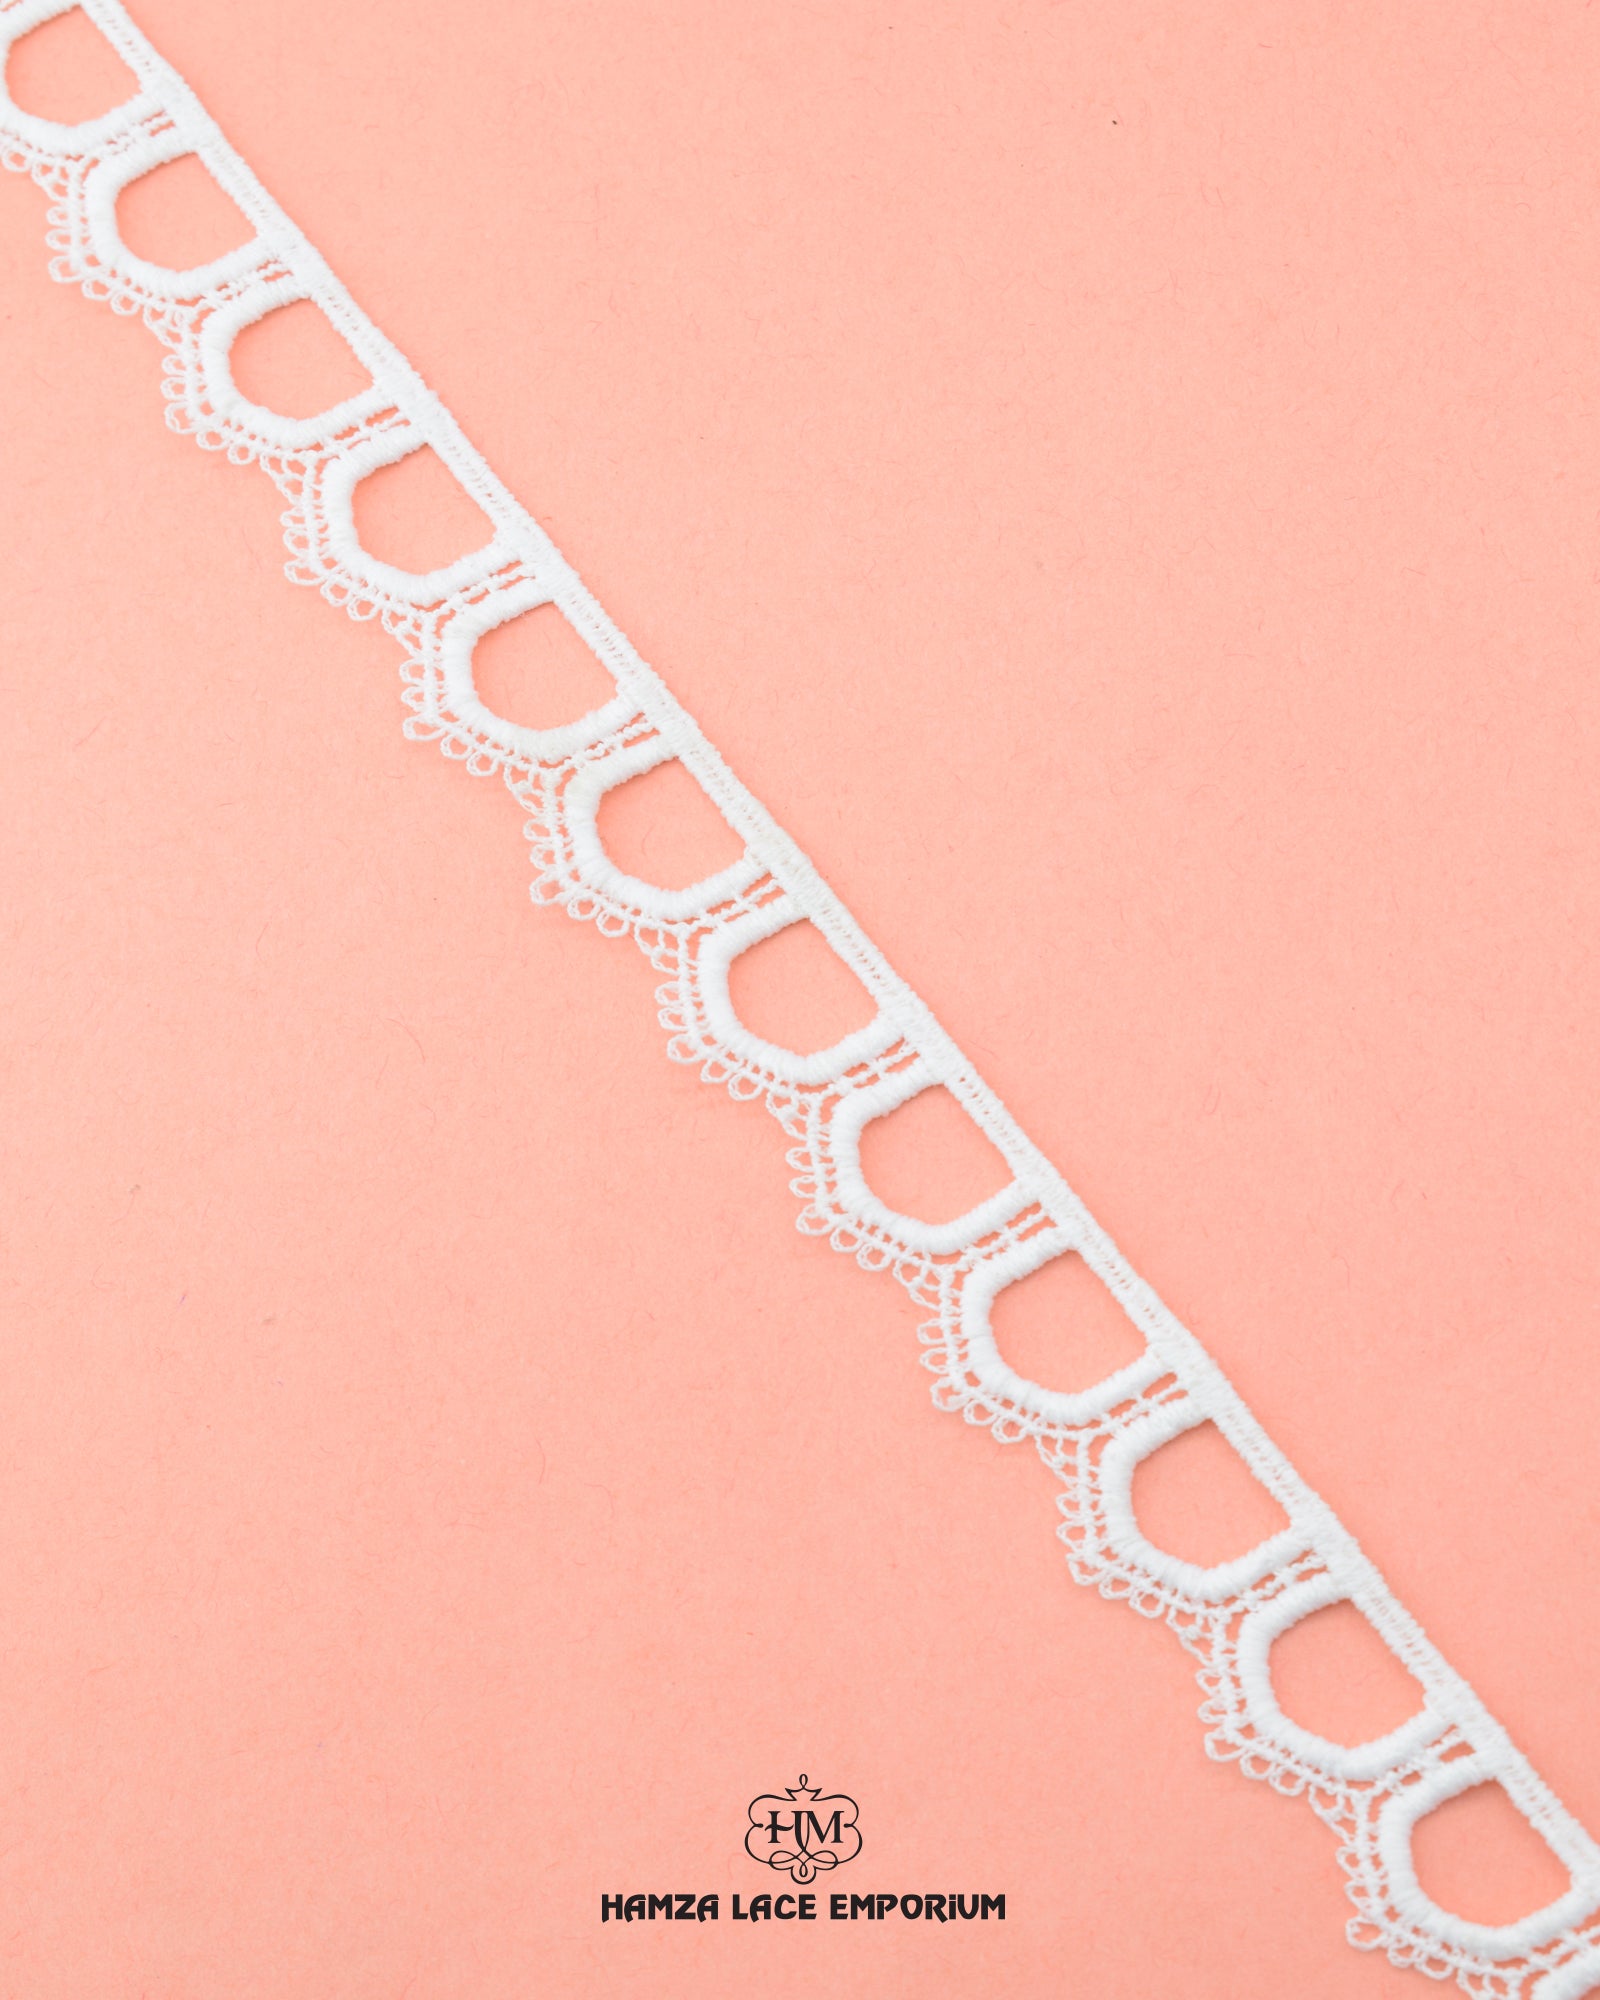 The white 'Edging Loop Lace 1500' with the 'Hamza Lace Emporium' sign and logo